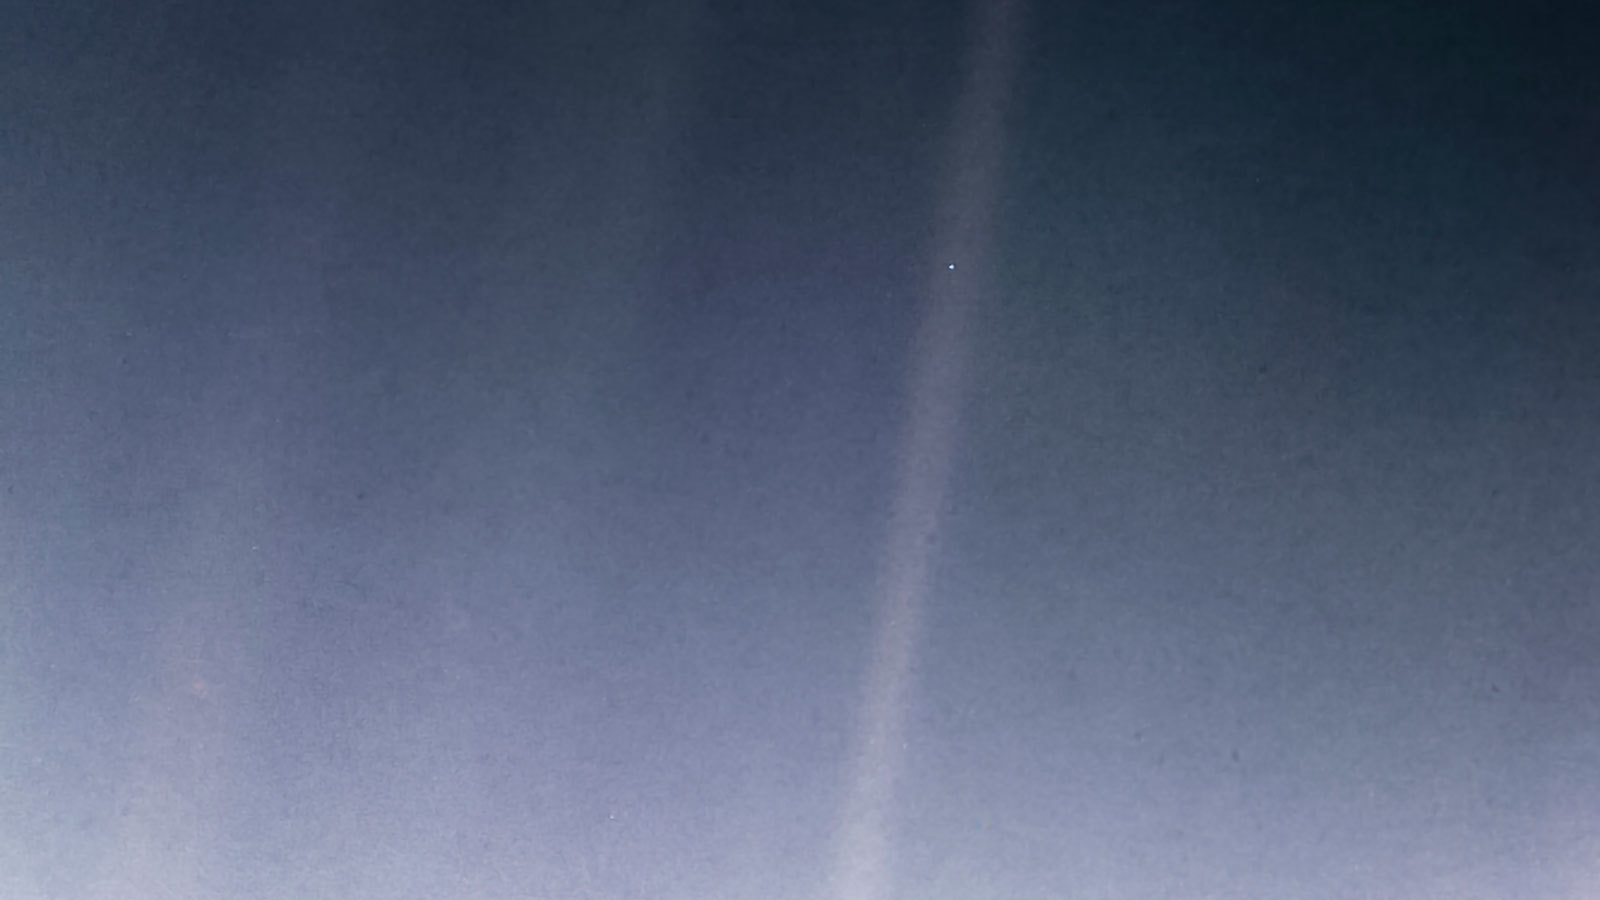 Earth as a tiny bluish dot suspended in a grainy beam of light.